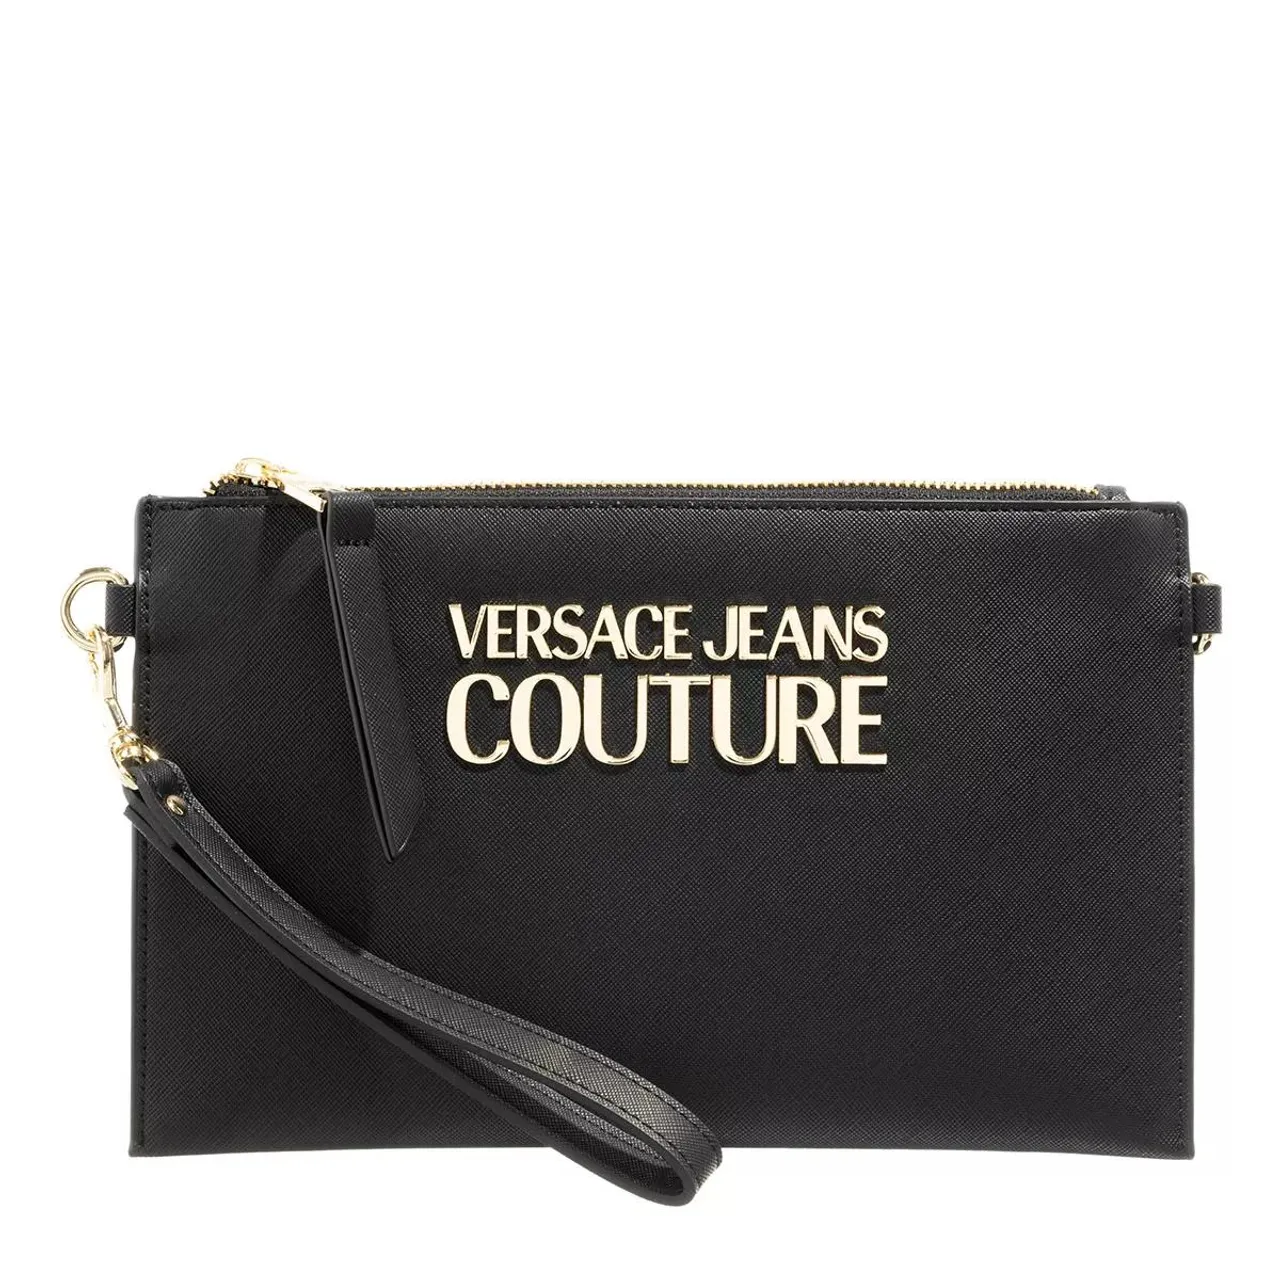 Versace Jeans Couture Clutches - Logo Lock - black - Clutches for ladies